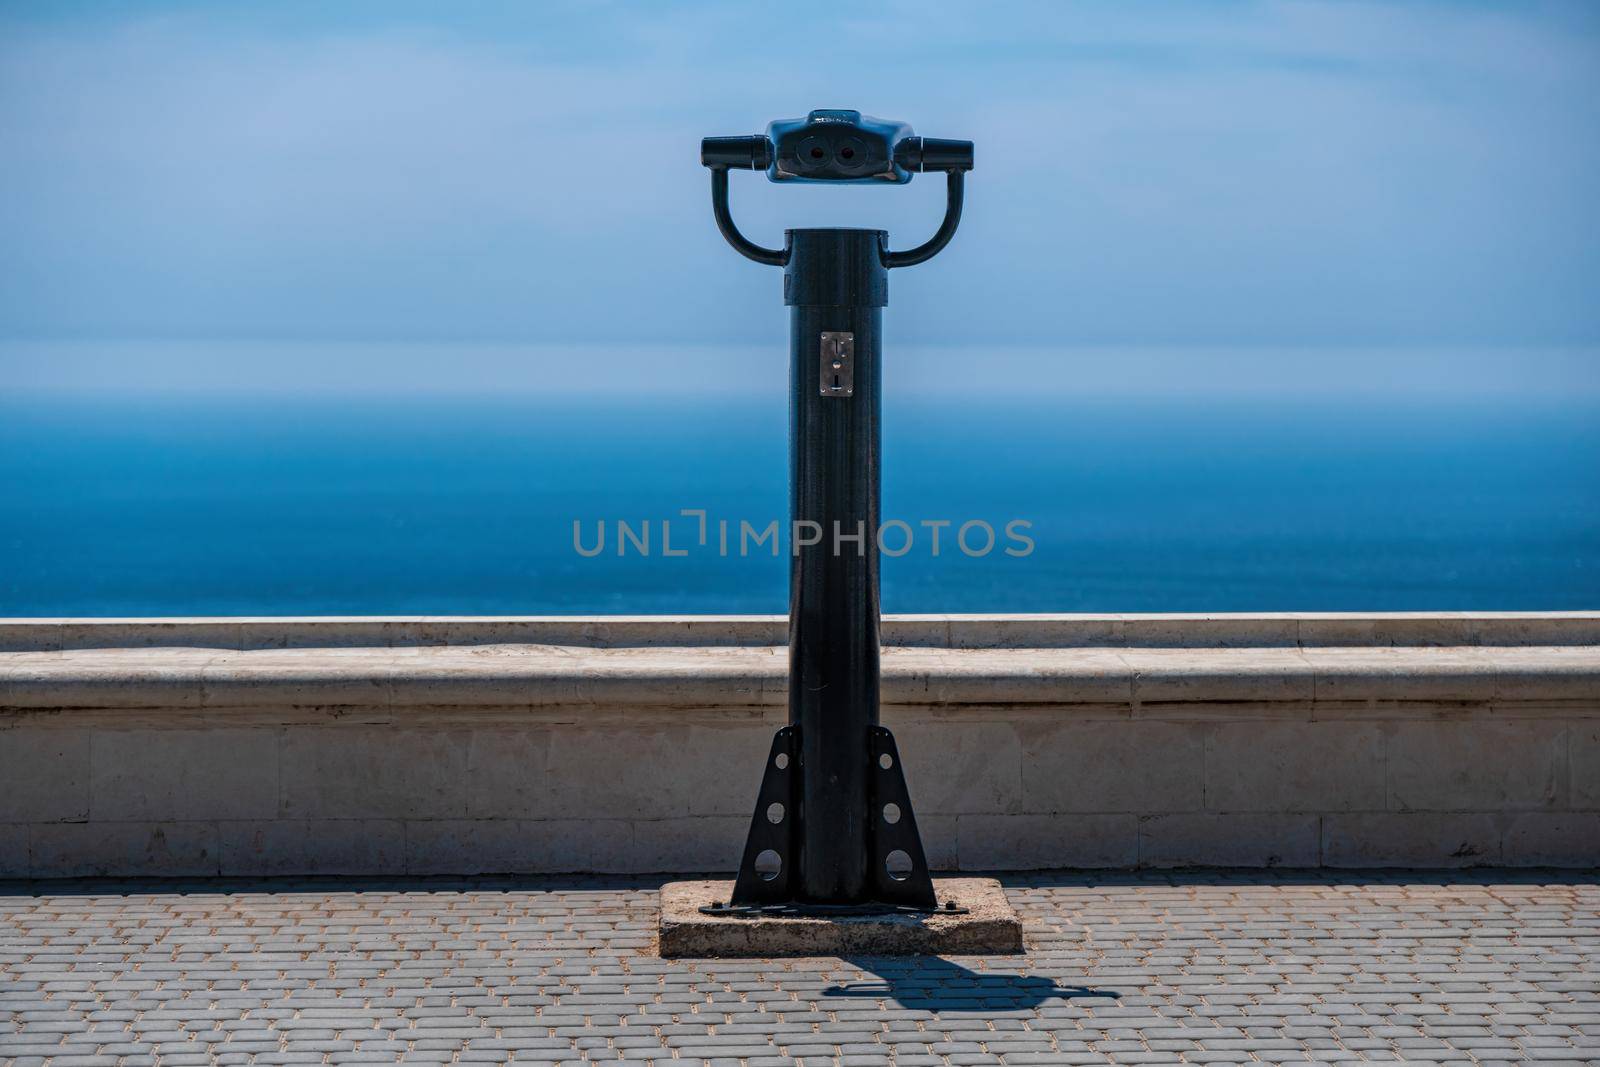 coin operated binoculars and blue sea background. Public panoramic binoculars to observe the sea view. Travel, relax or loneliness concept.